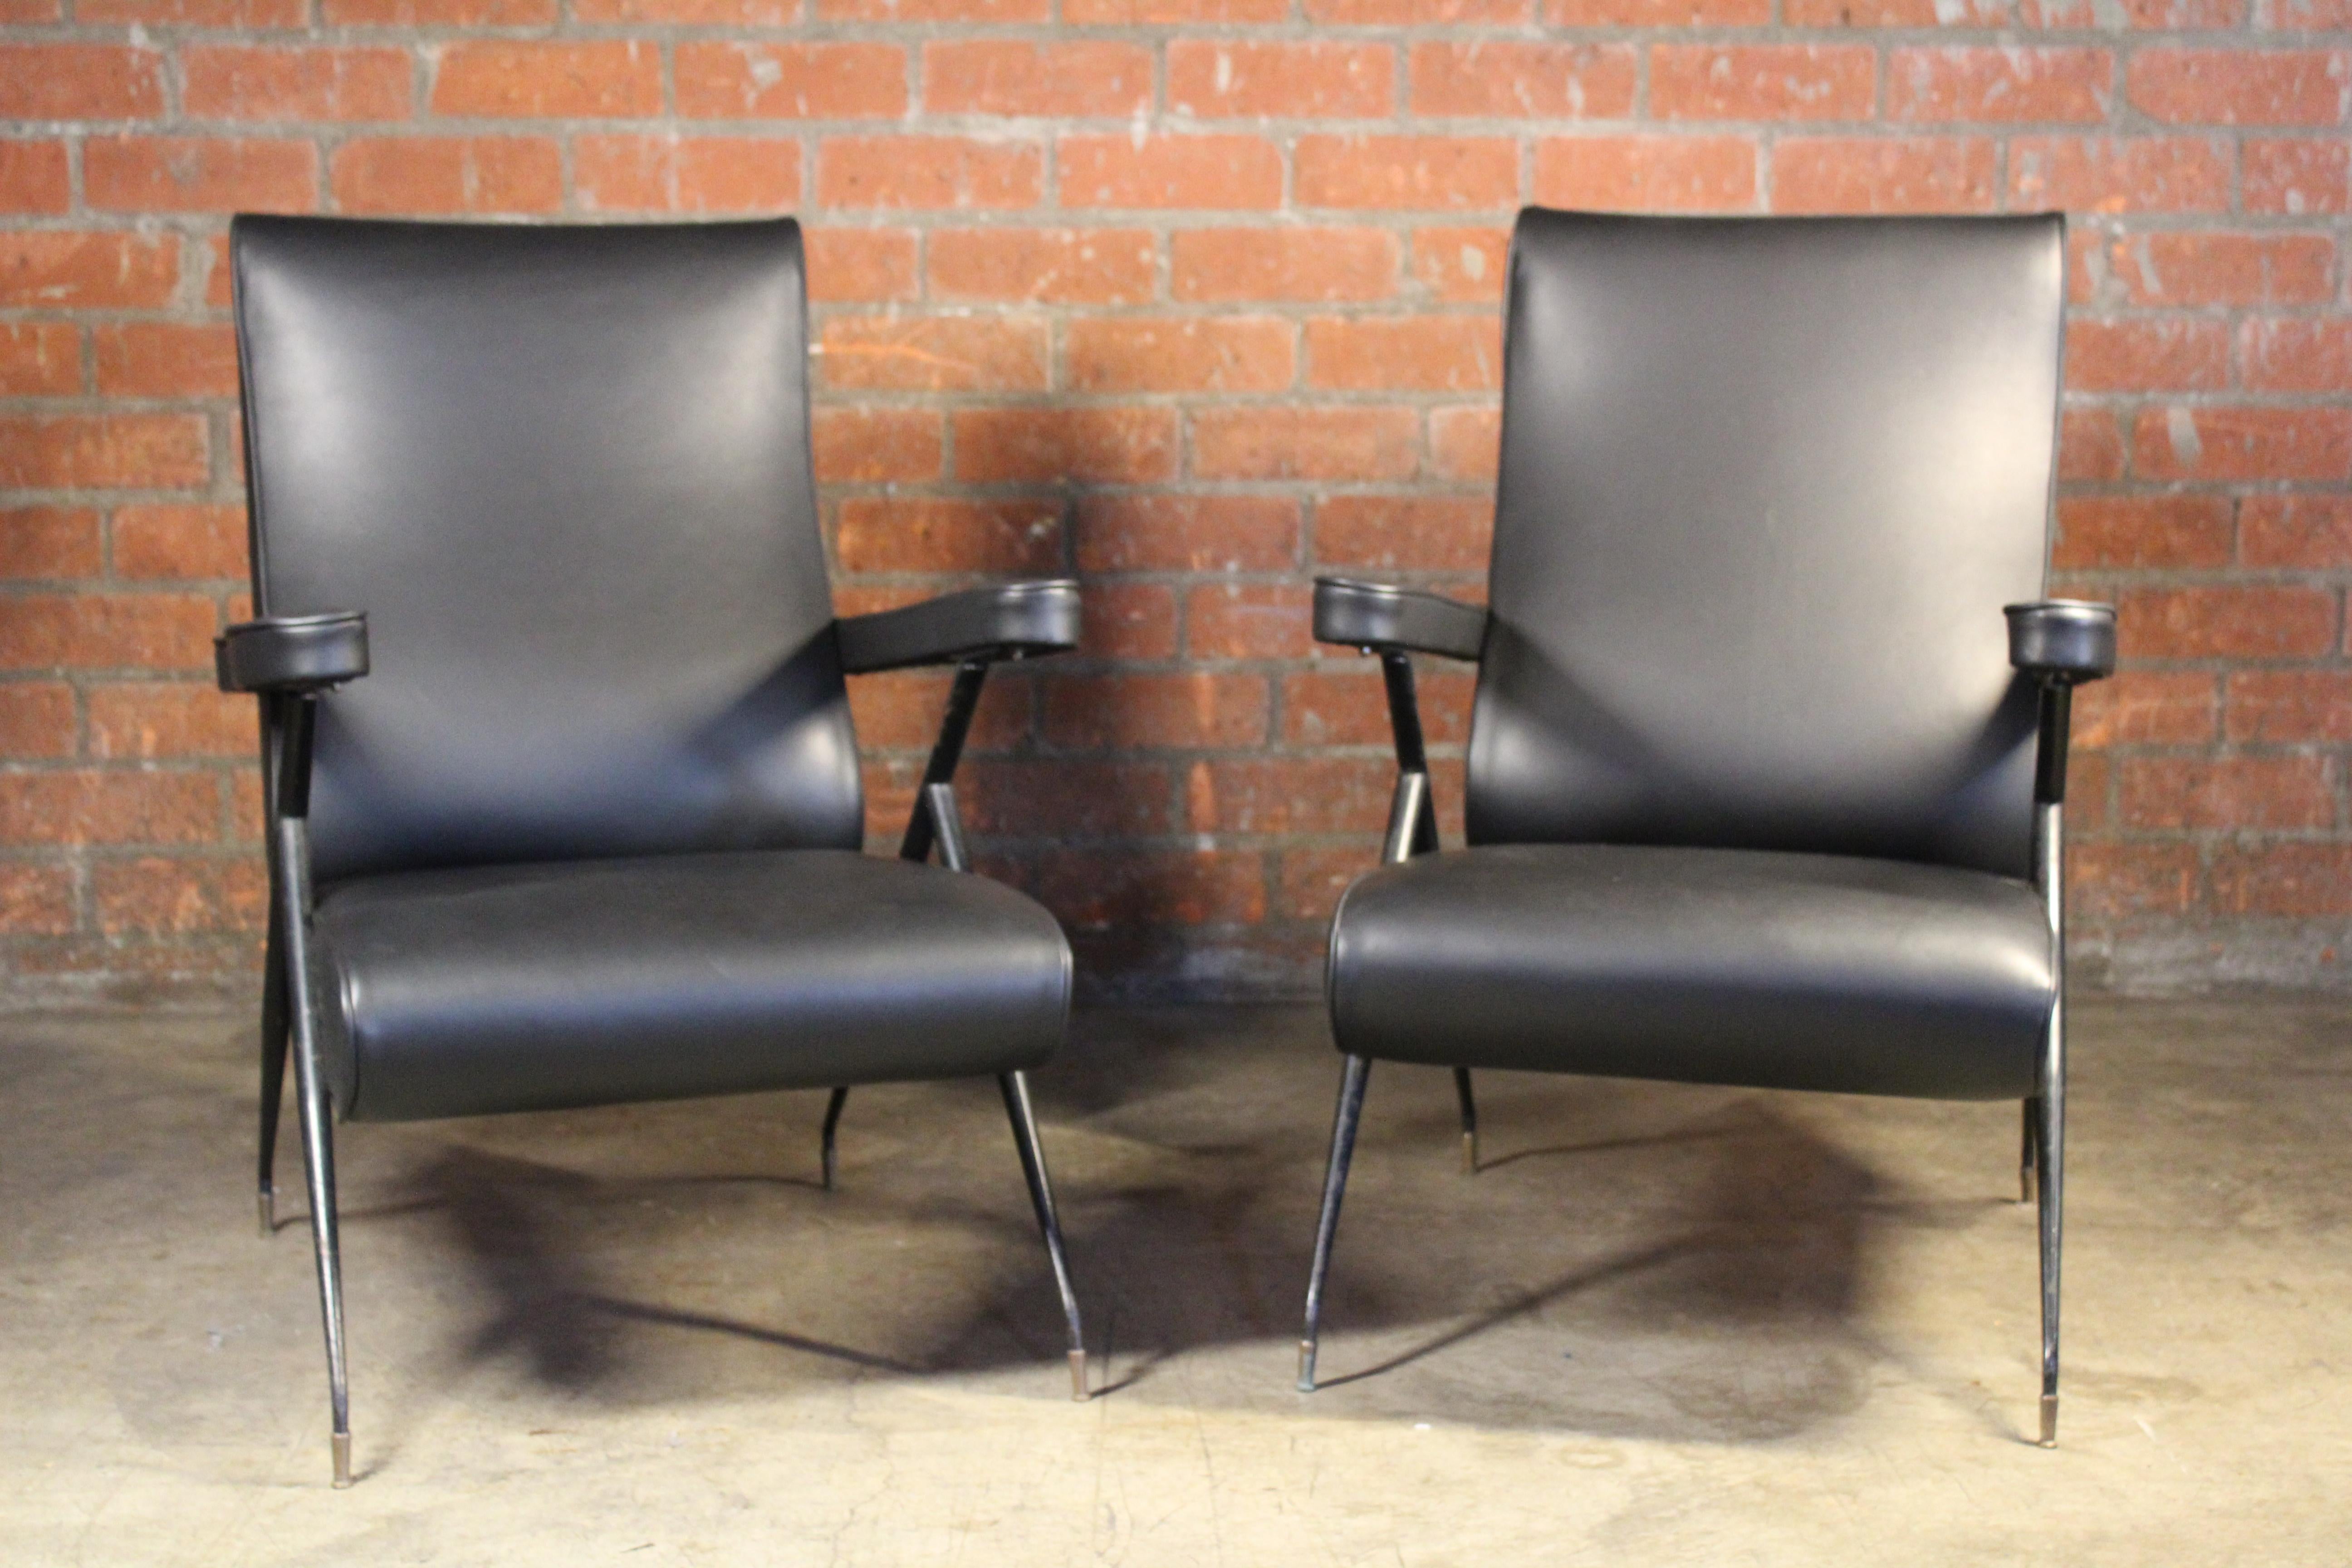 Pair of reclining armchairs, newly upholstered in black leather hide. Can be used in two positions. In good condition with patina to the metal frame. Brass sabot feet. Sold as a pair.